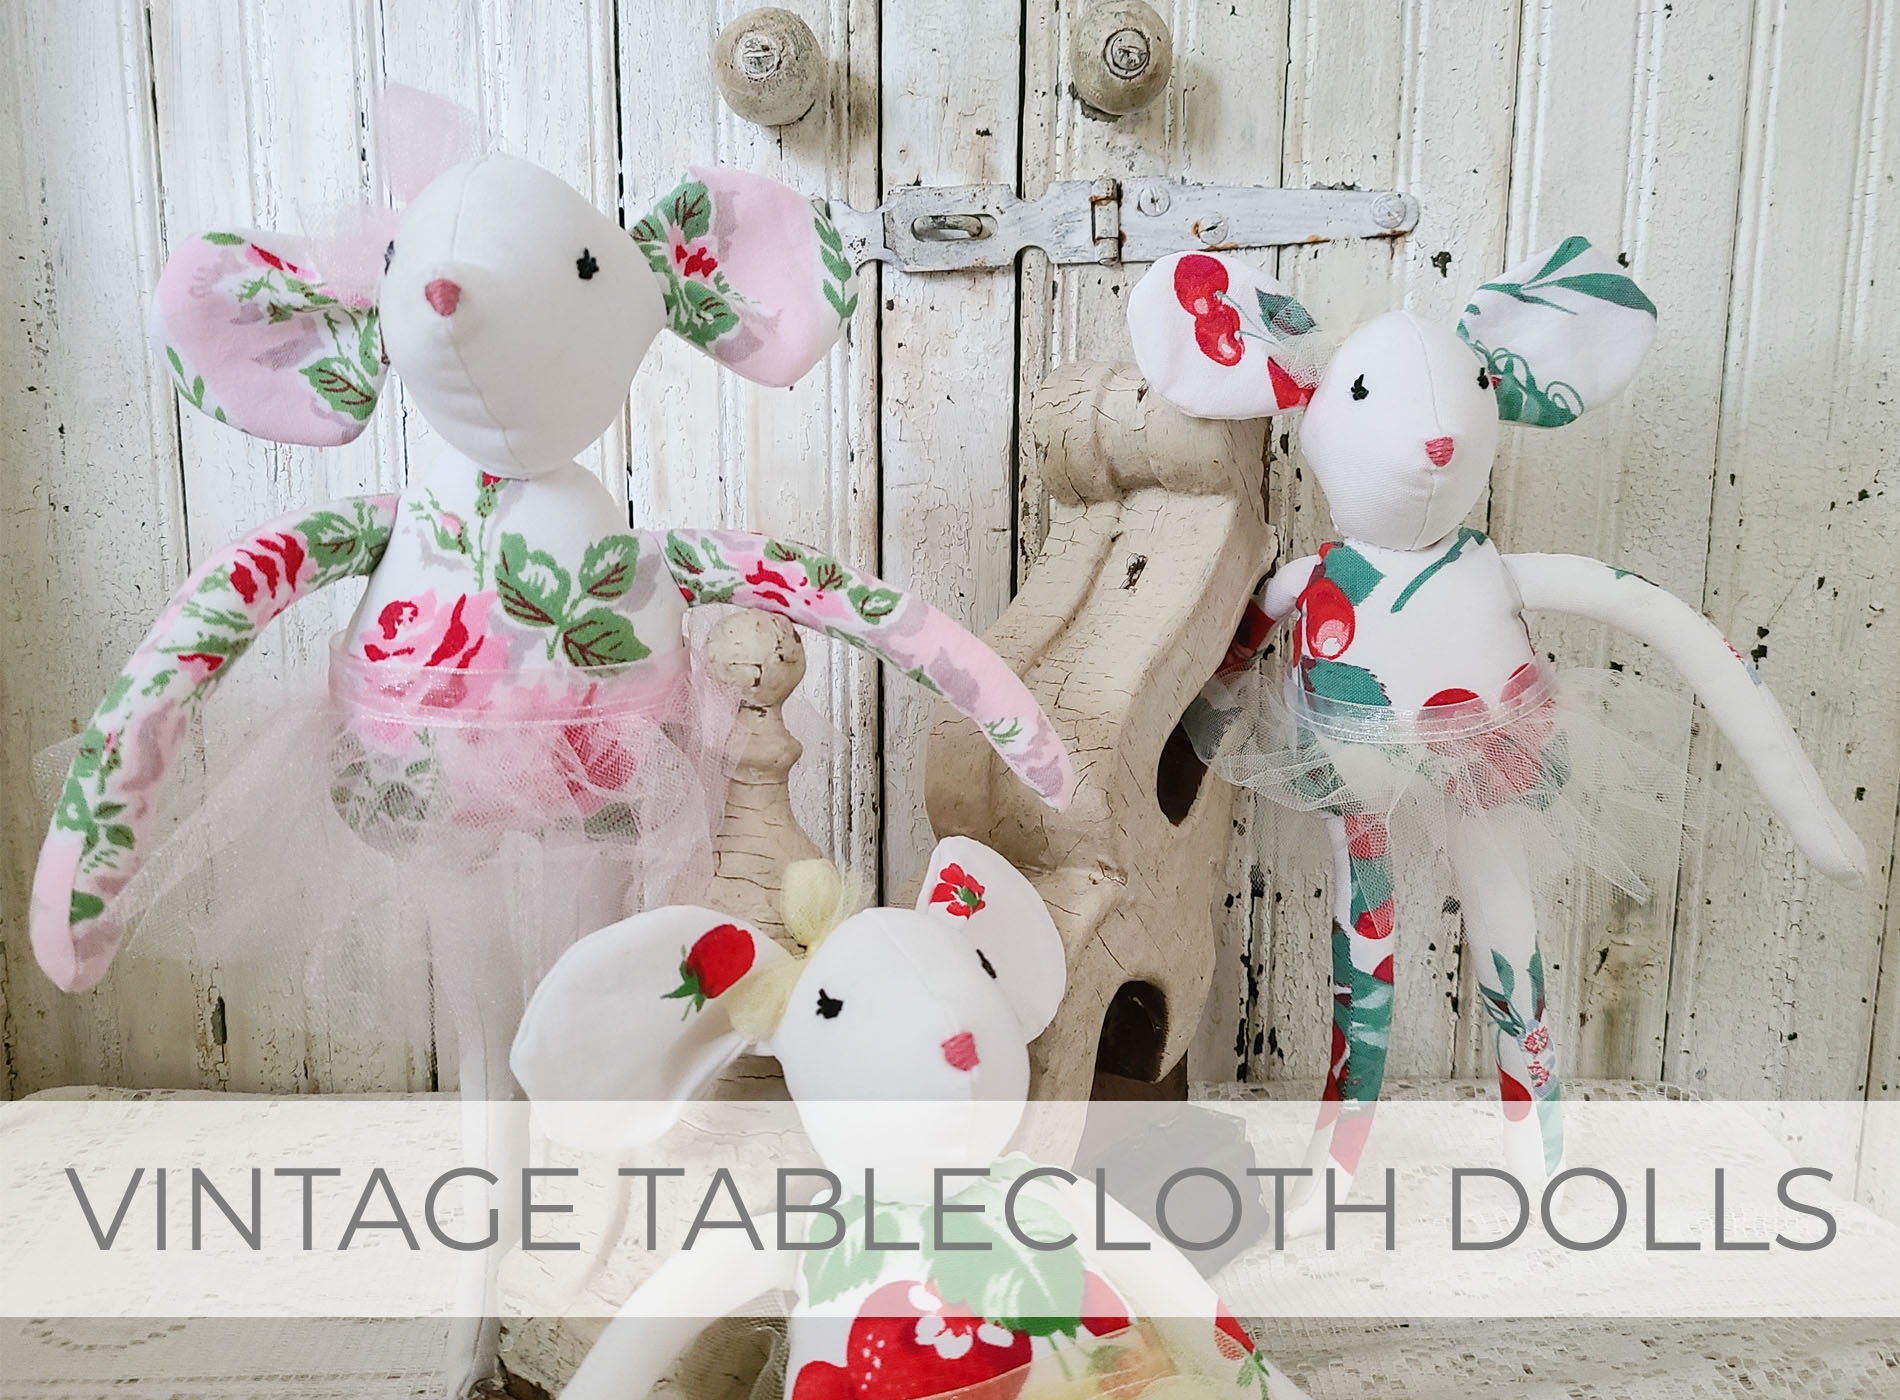 Vintage Tablecloth Upcycled into Heirloom Dolls by Larissa of Prodigal Pieces | prodigalpieces.com #prodigalpieces